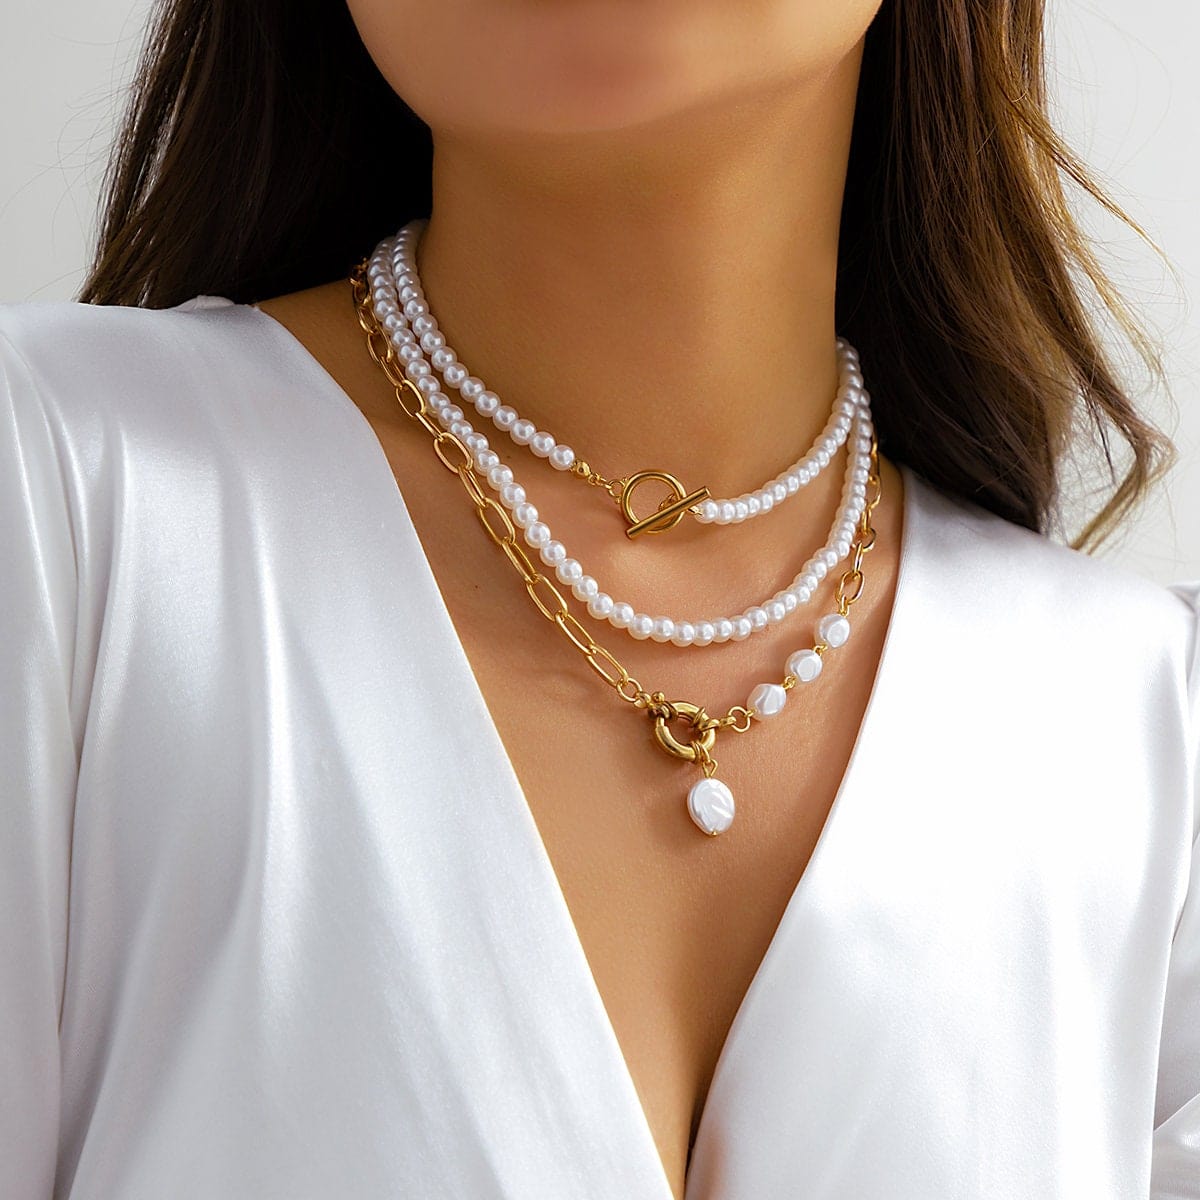 Women'S Delicate Layered Necklace Necklace Pearl Pendant Adjustable Punk  Necklace Set 